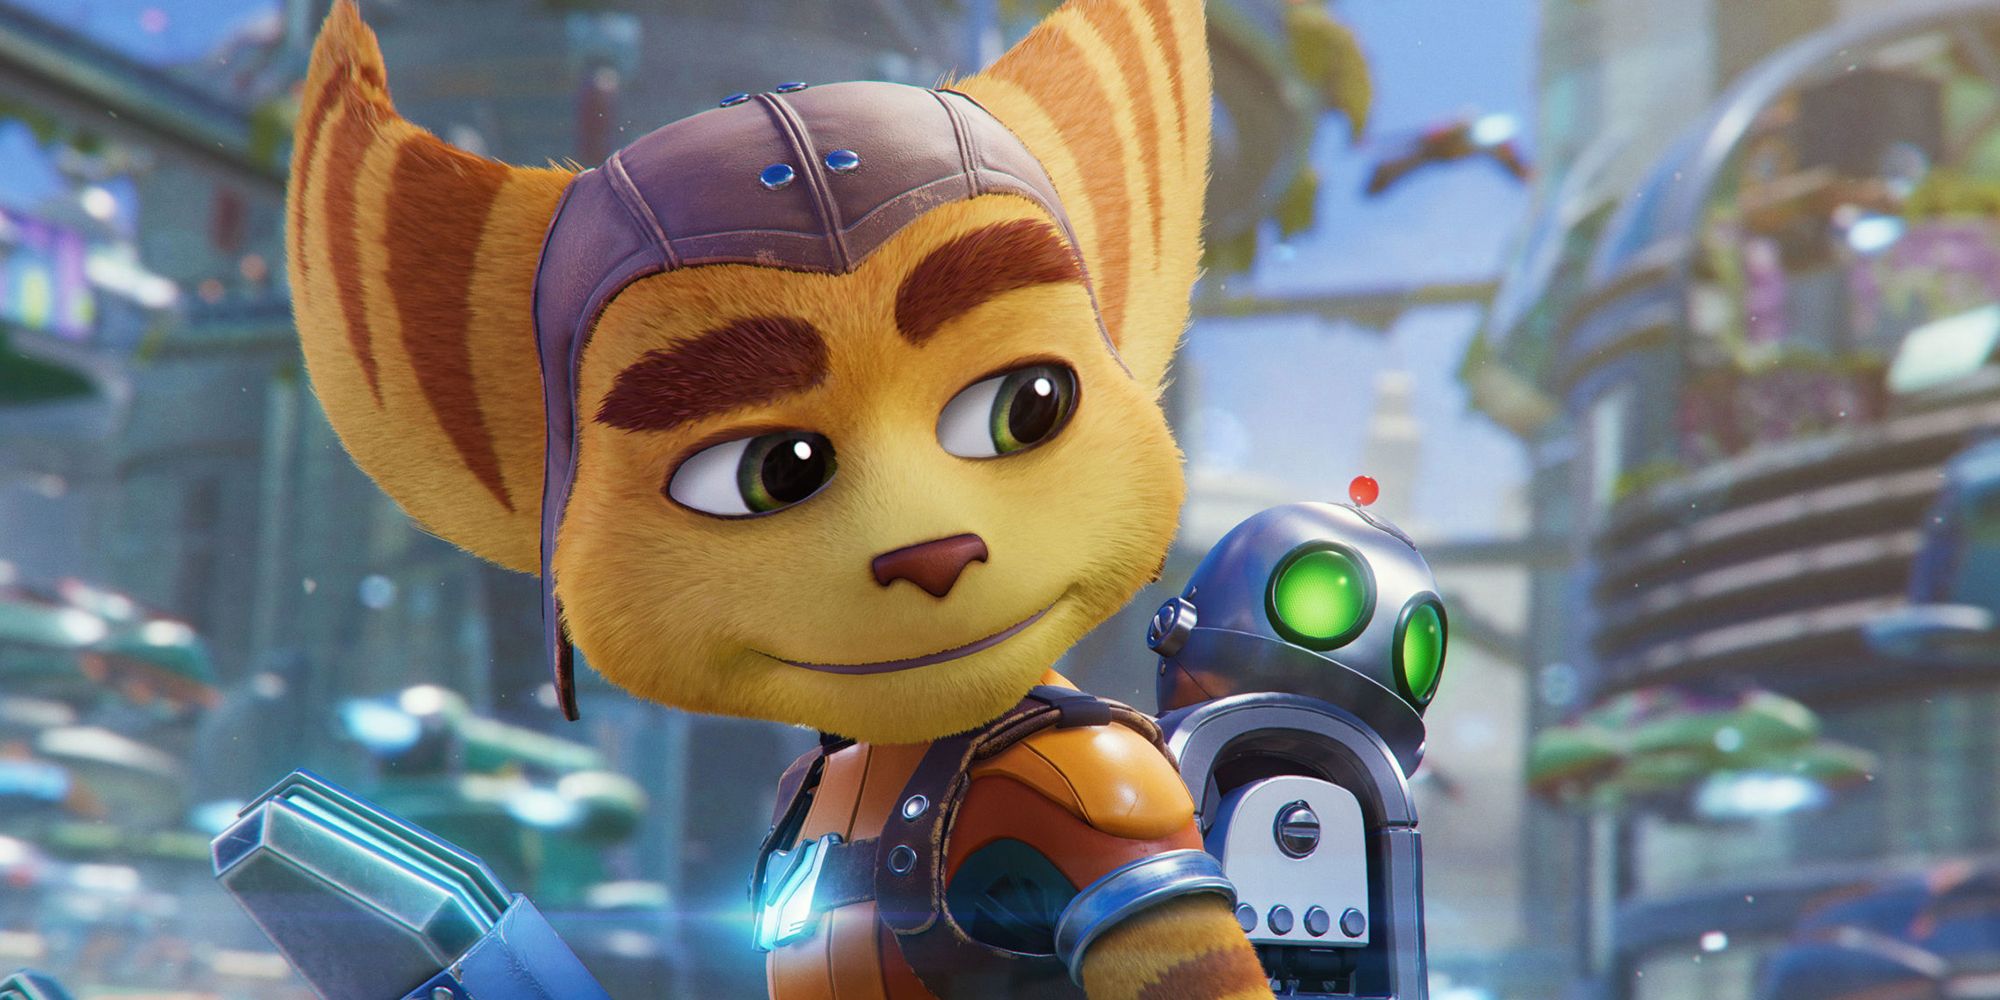 Clank on Ratchet's back in Ratchet & Clank: Rift Apart.